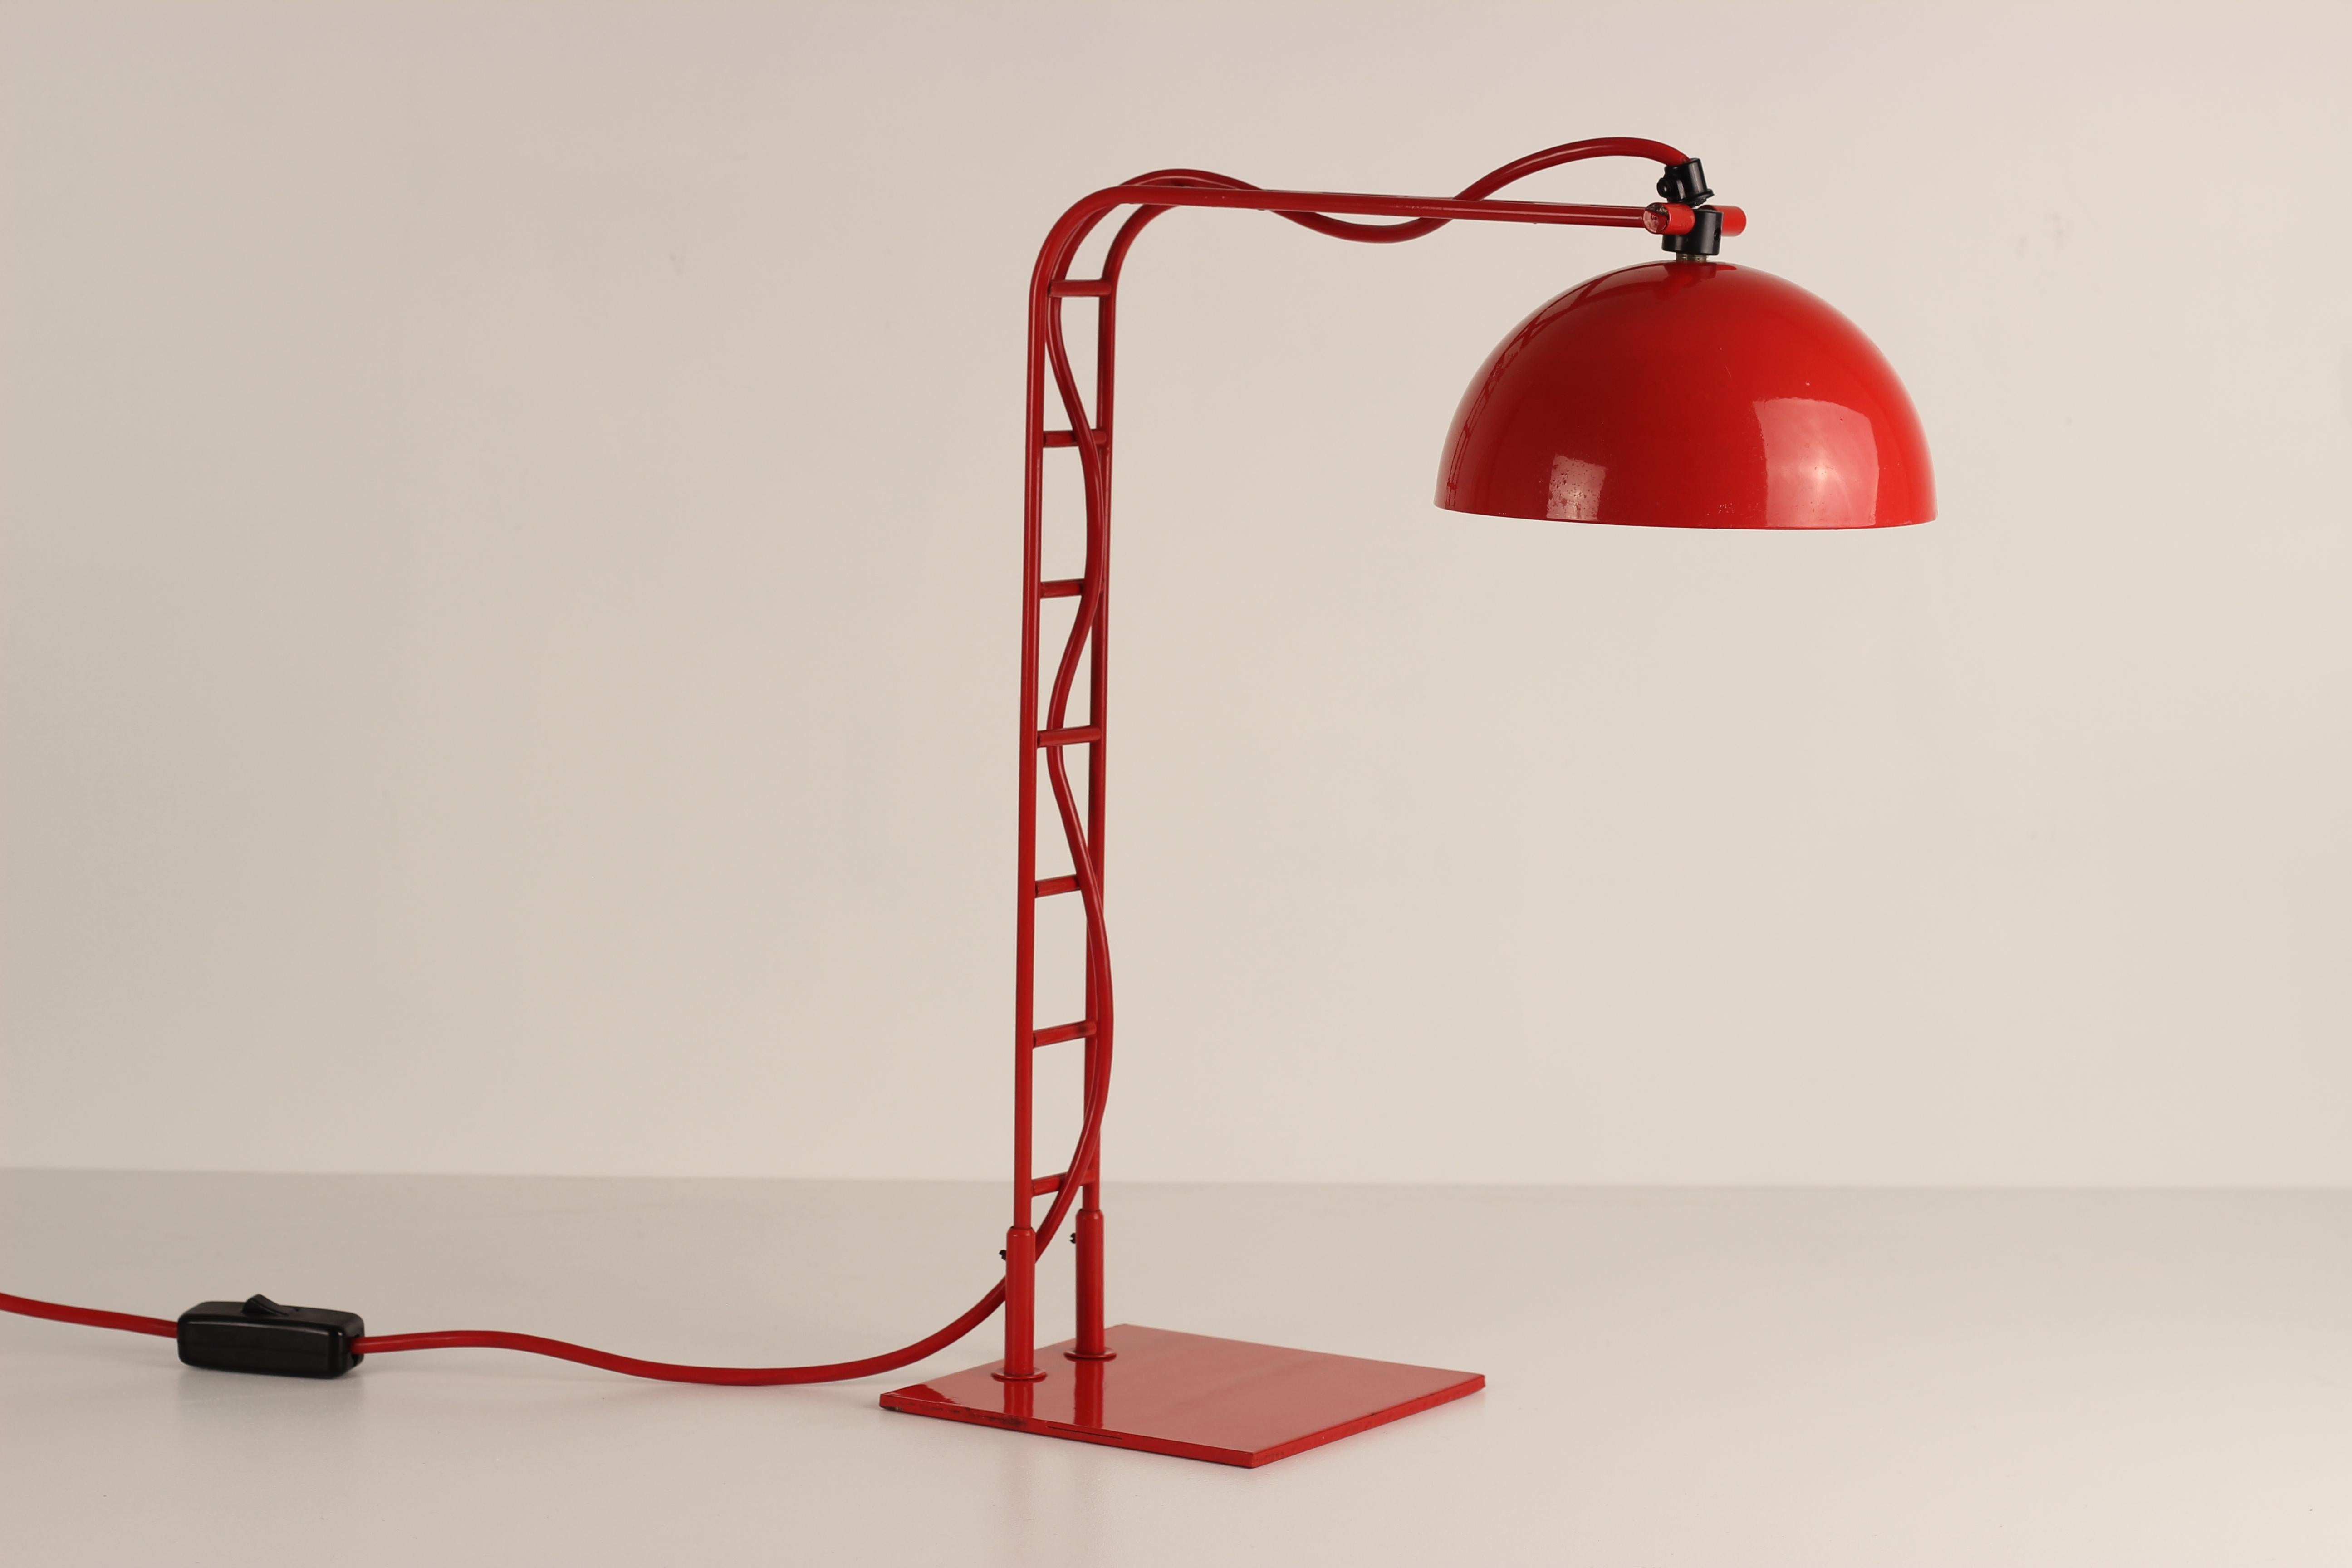 English Space Age Red Ladder Desk Lamp 1960’s from the Lord Robert Boothby Estate  For Sale